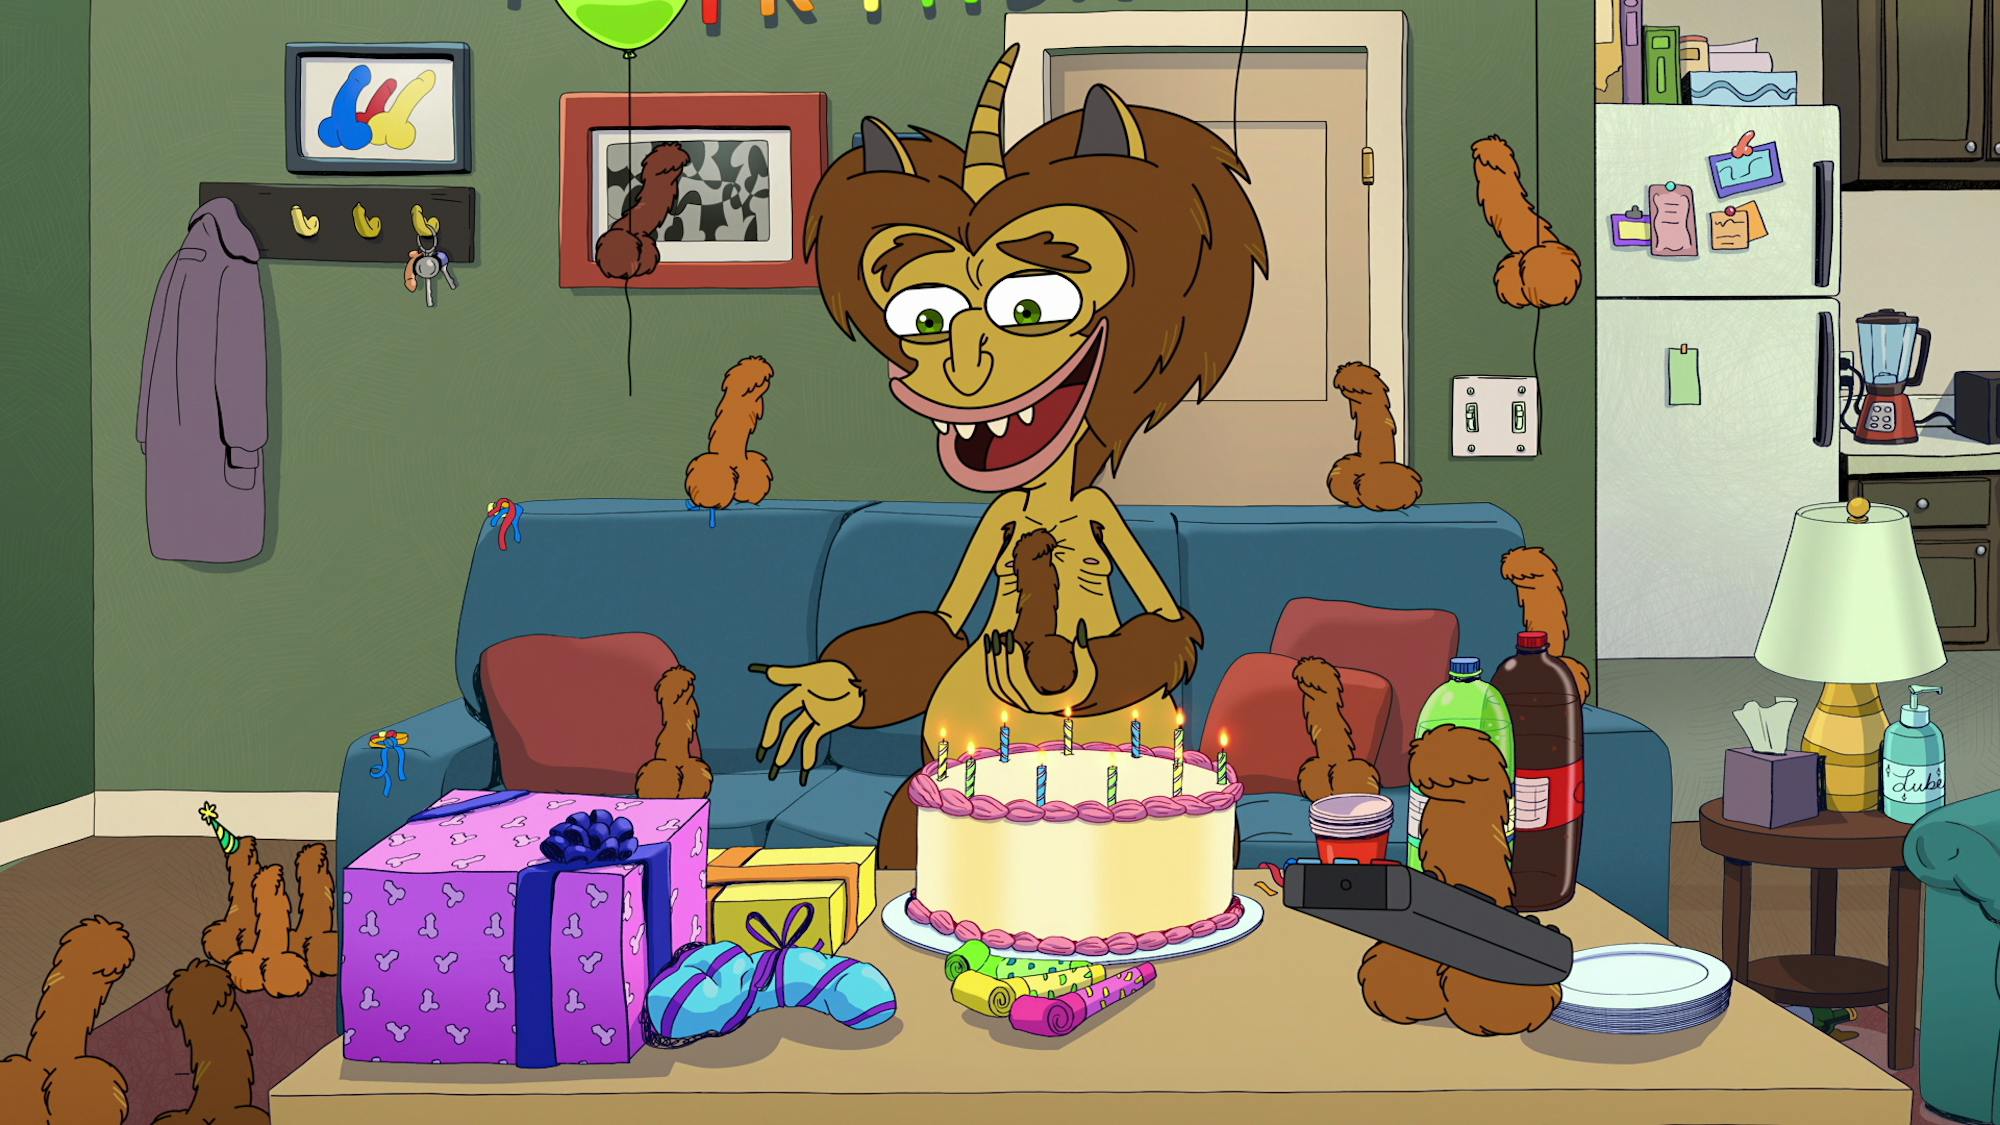 A hormone monster looks delightedly at a cake, presents, and dildos scattered about his messy room.